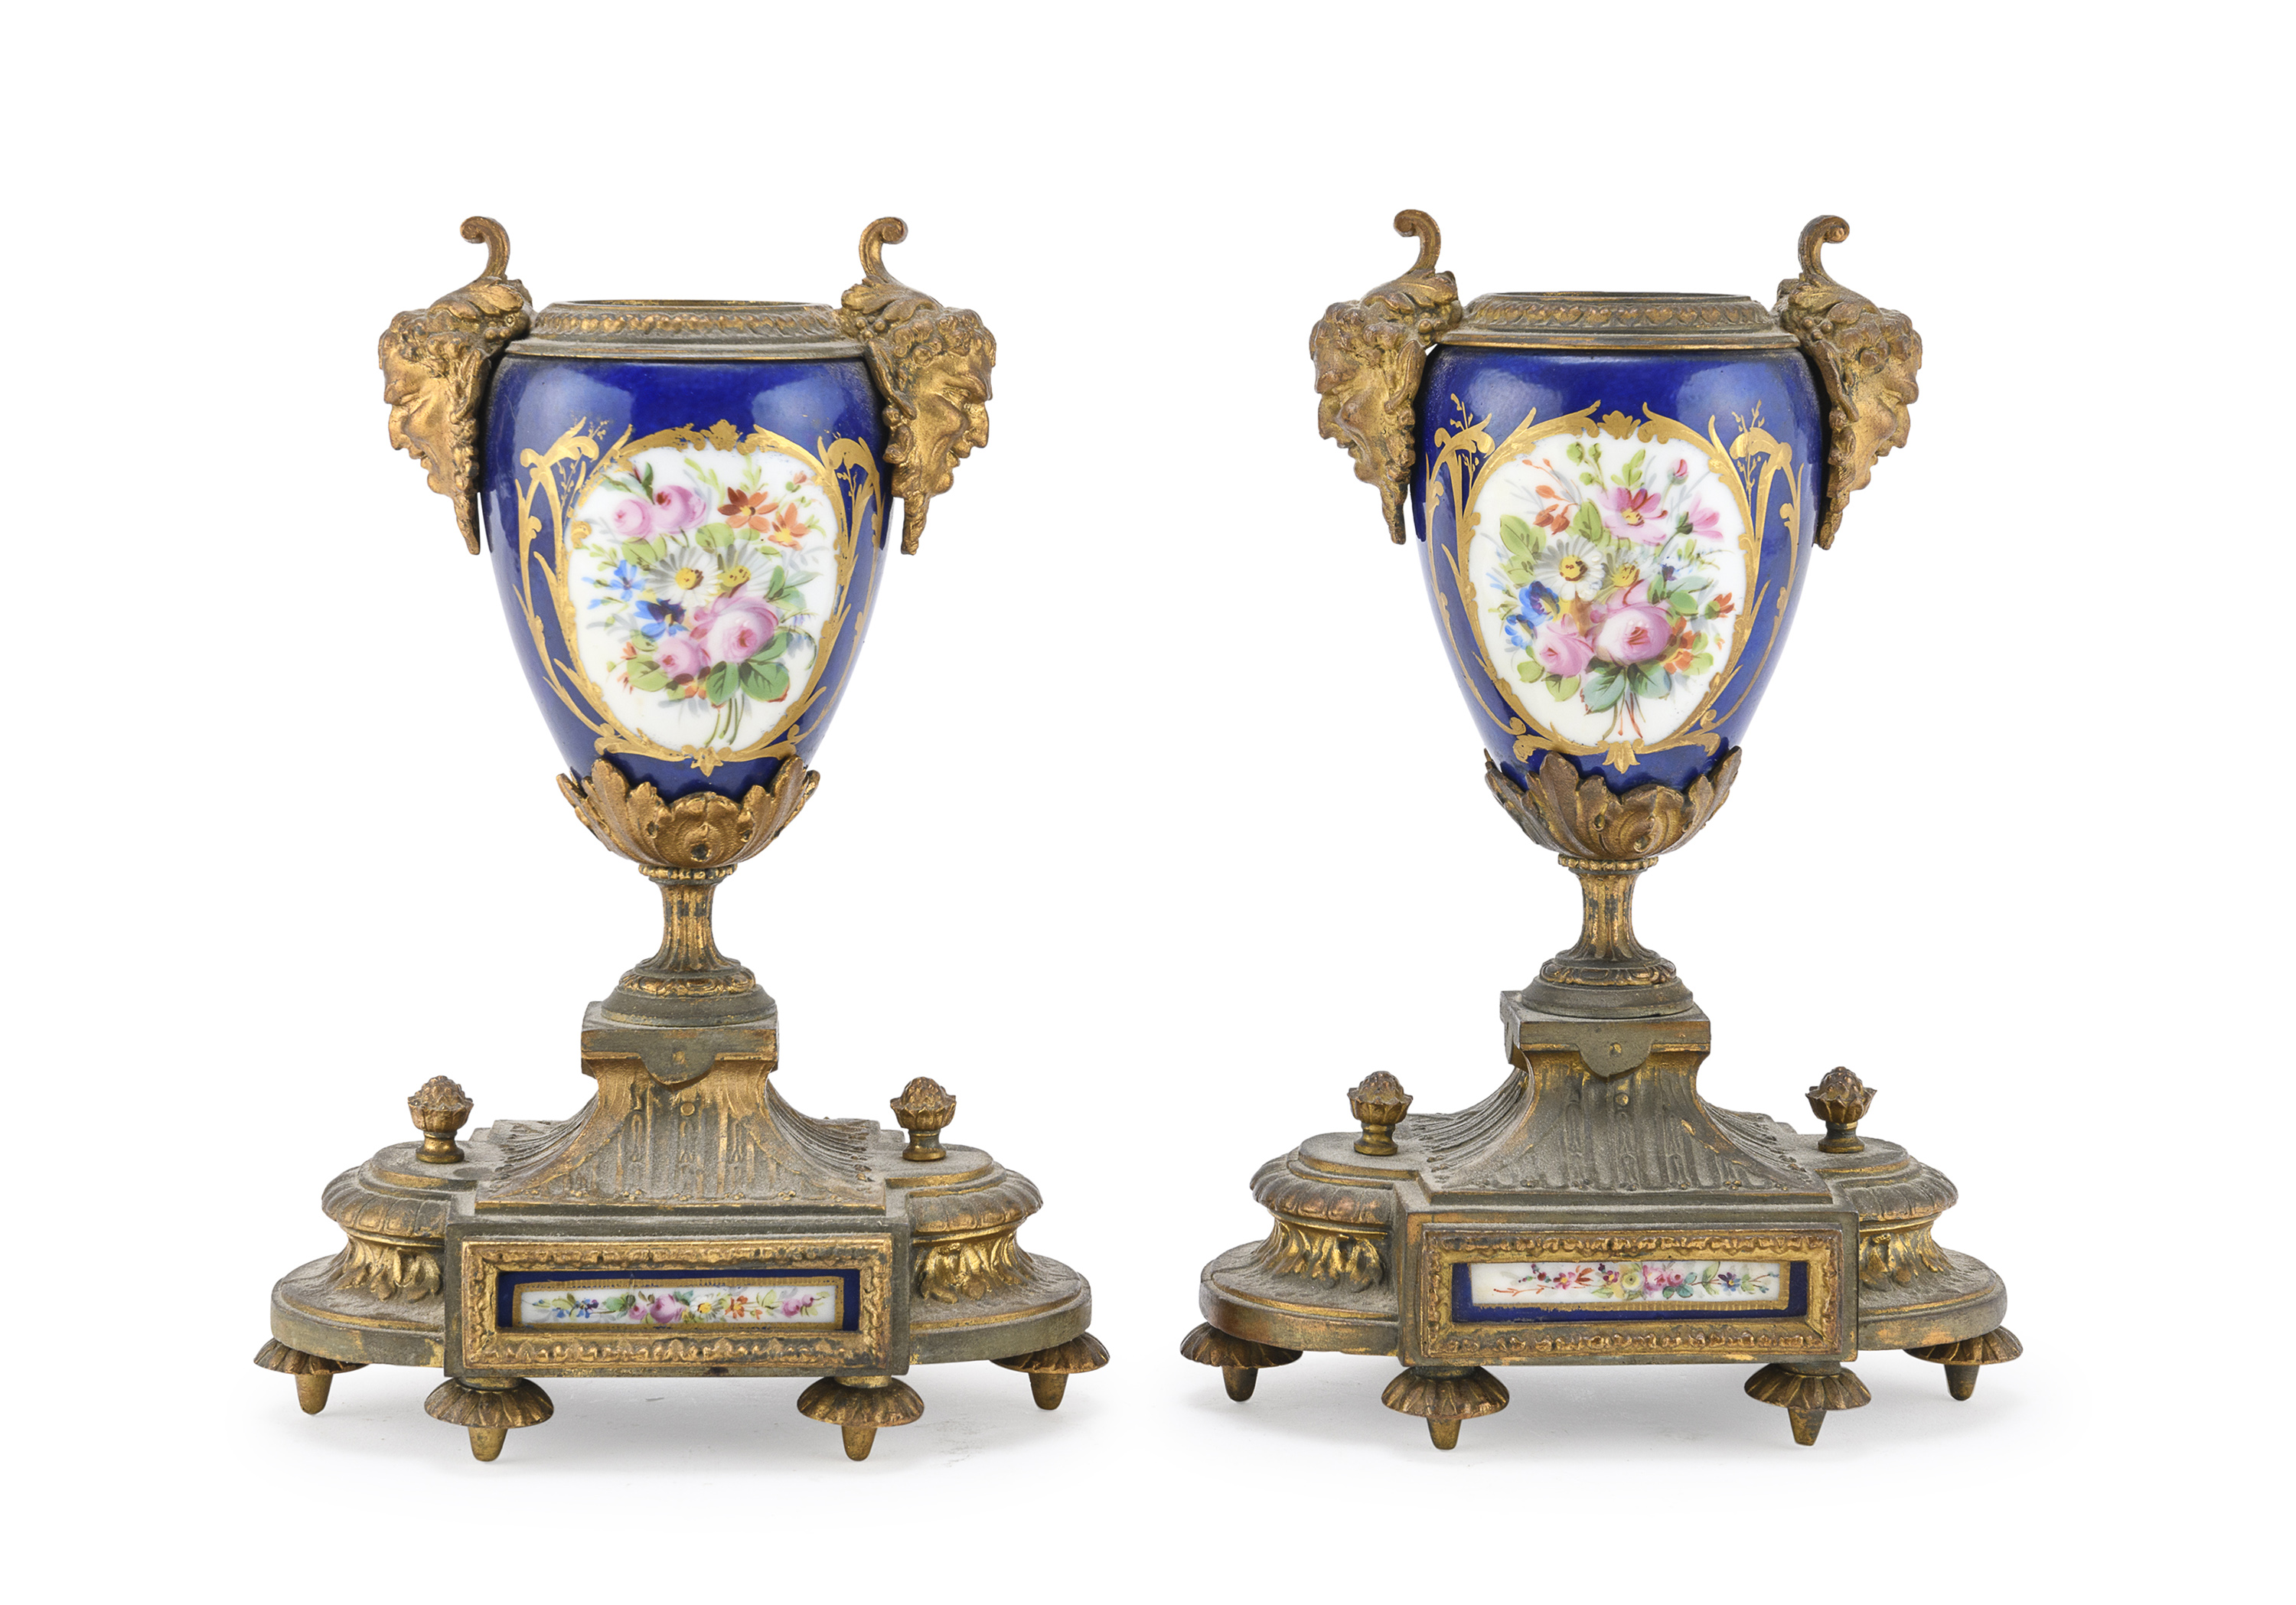 PAIR OF PORCELAIN AND BRONZE VASES 19th CENTURY FRANCE